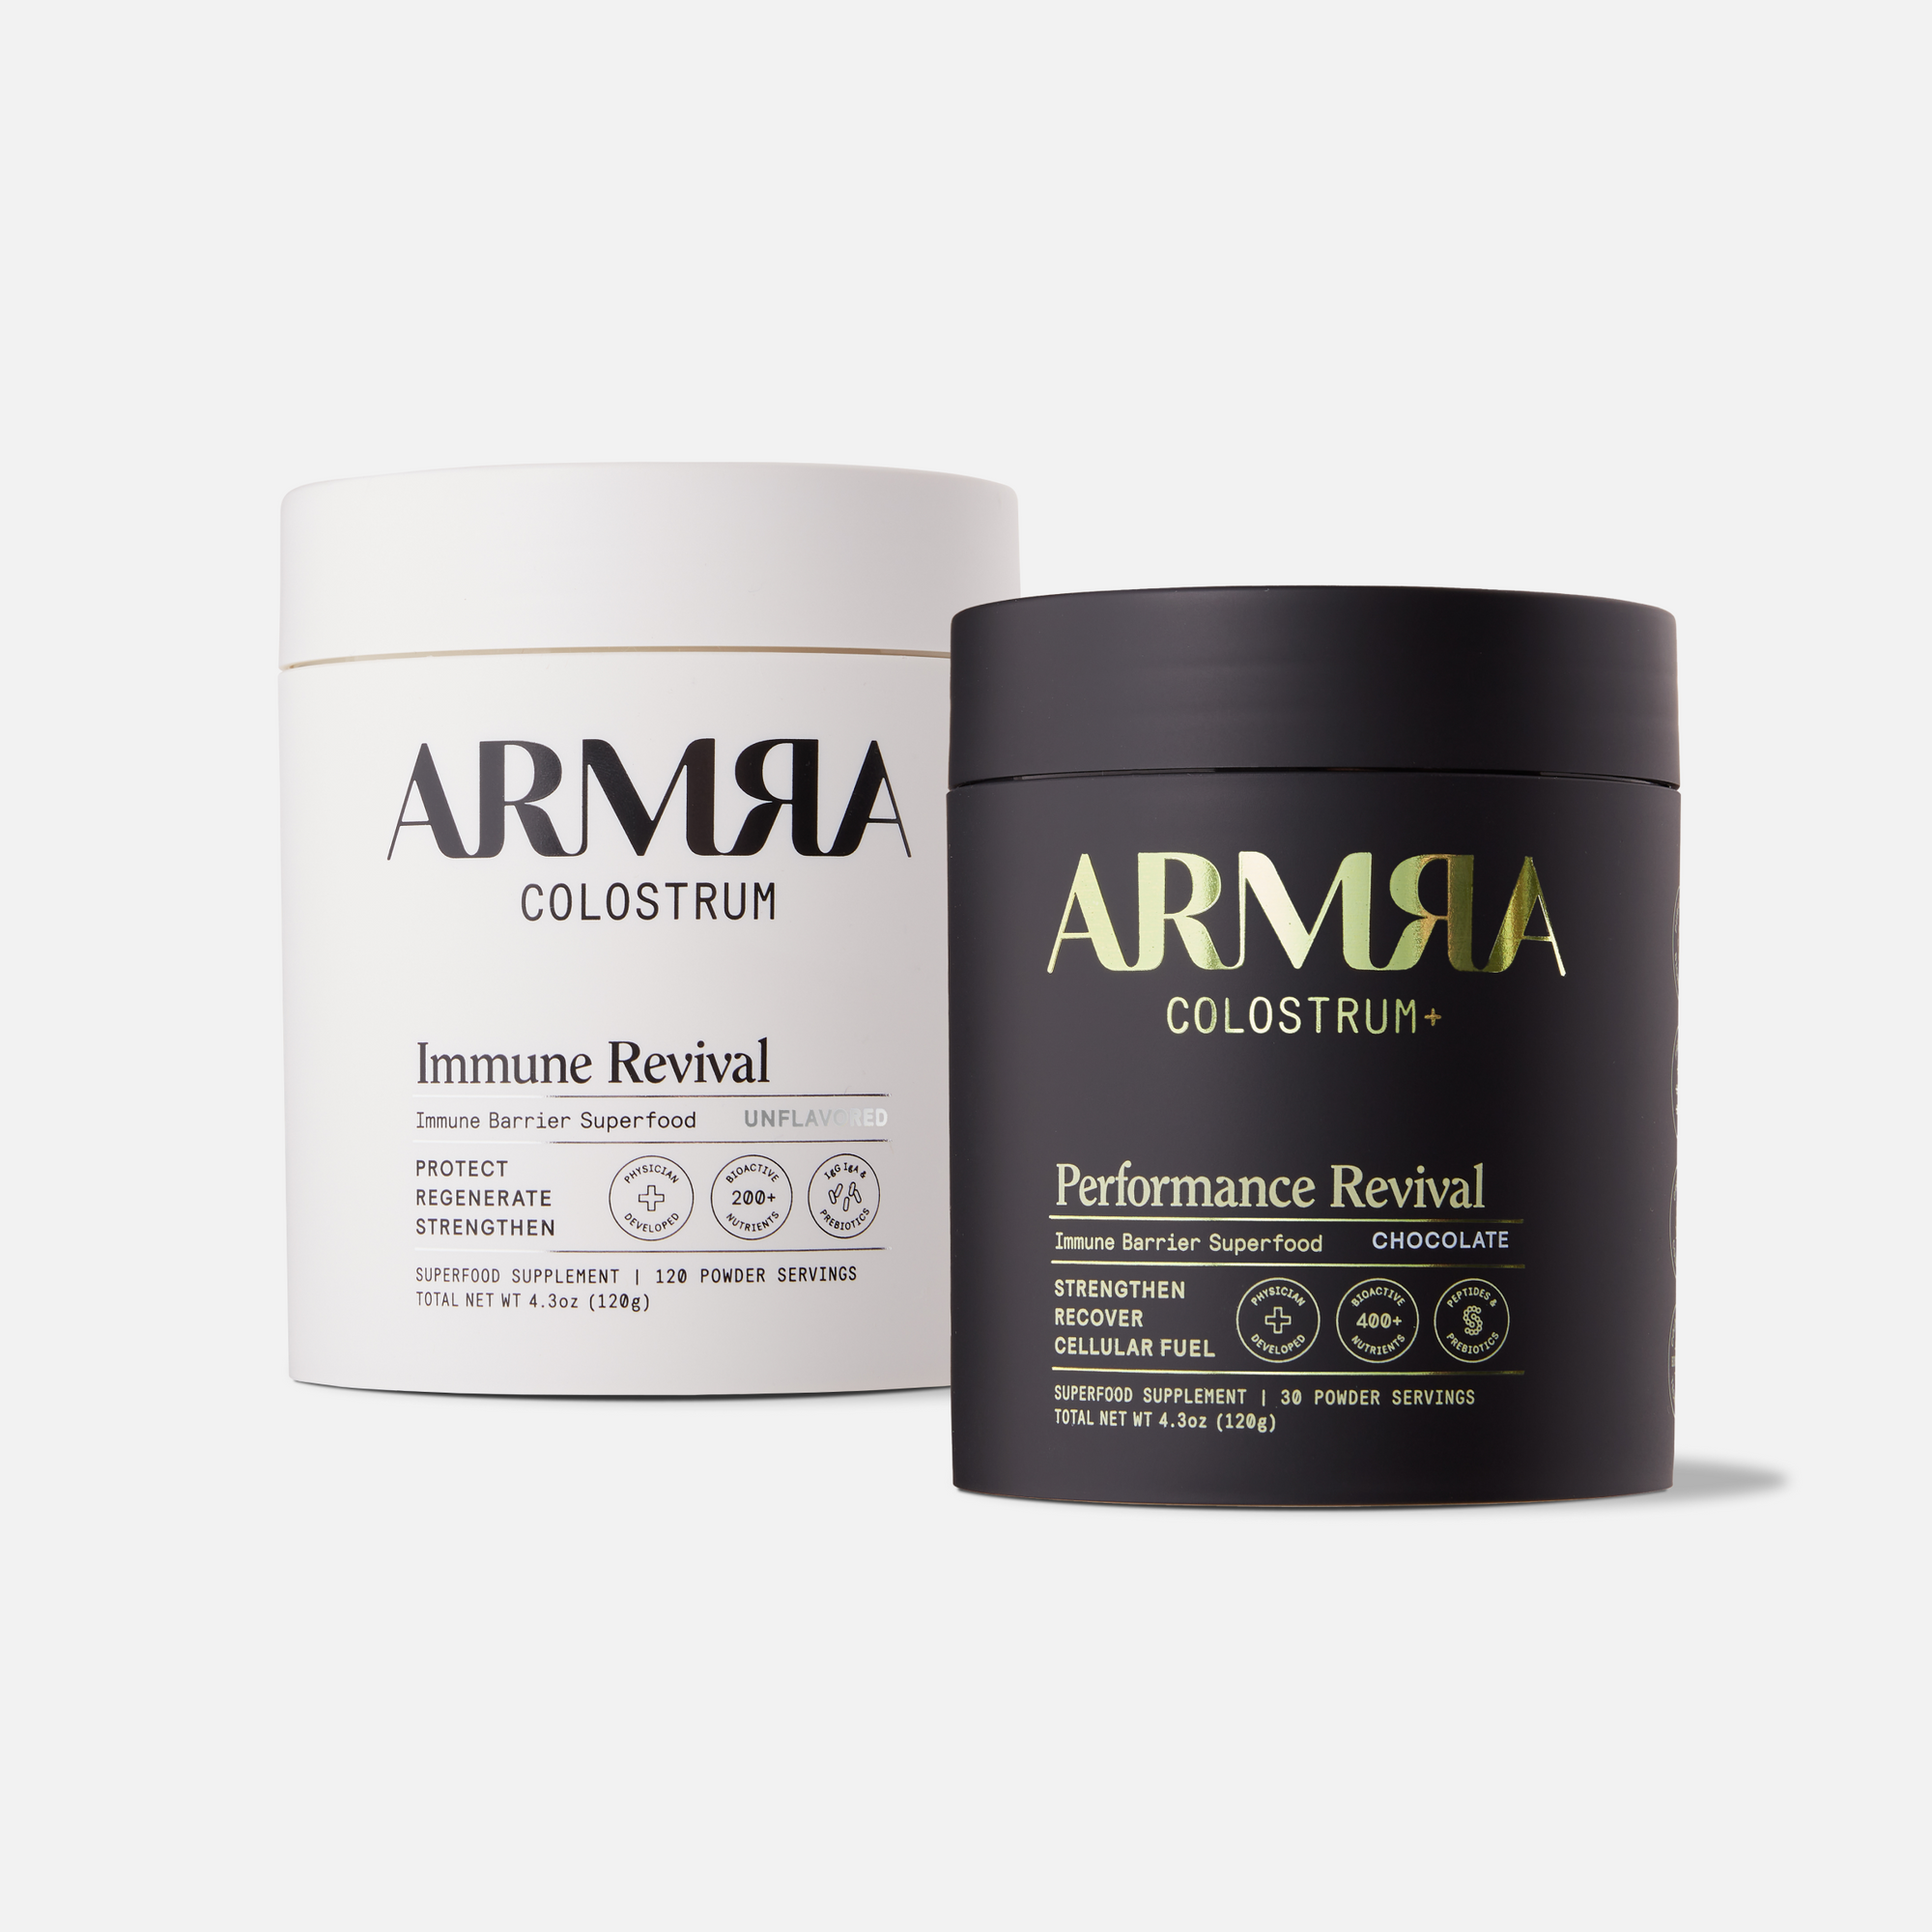 White Jar of ARMRA Colostrum Immune Revival and Black Jar of ARMRA Performance Revival on White Background